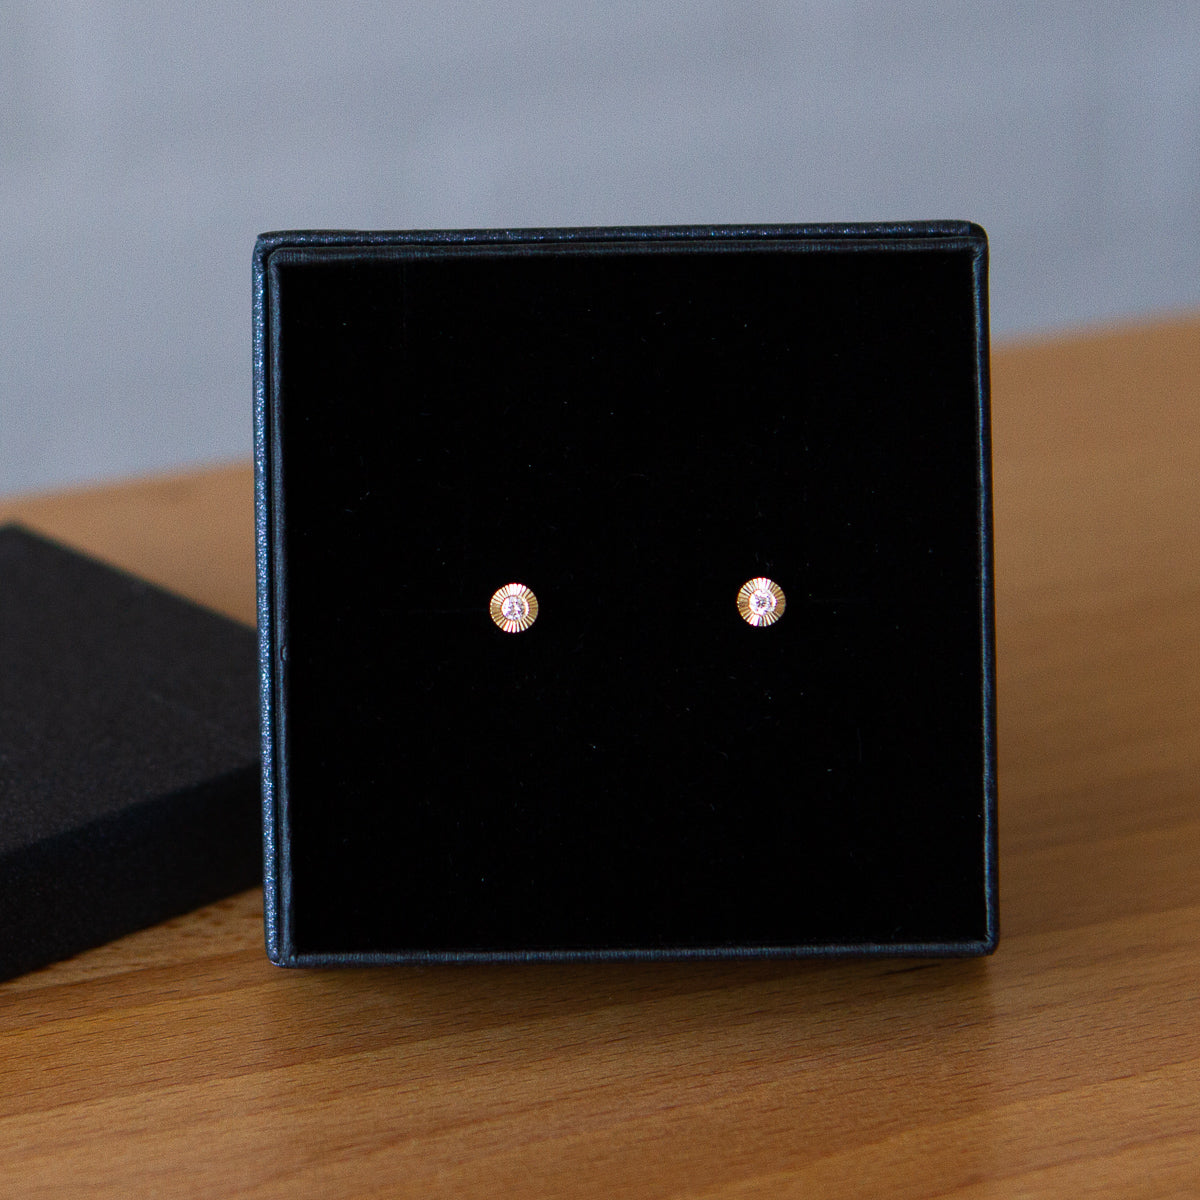 14k yellow gold small engraved Aurora stud earrings with white diamond centers in a gift box